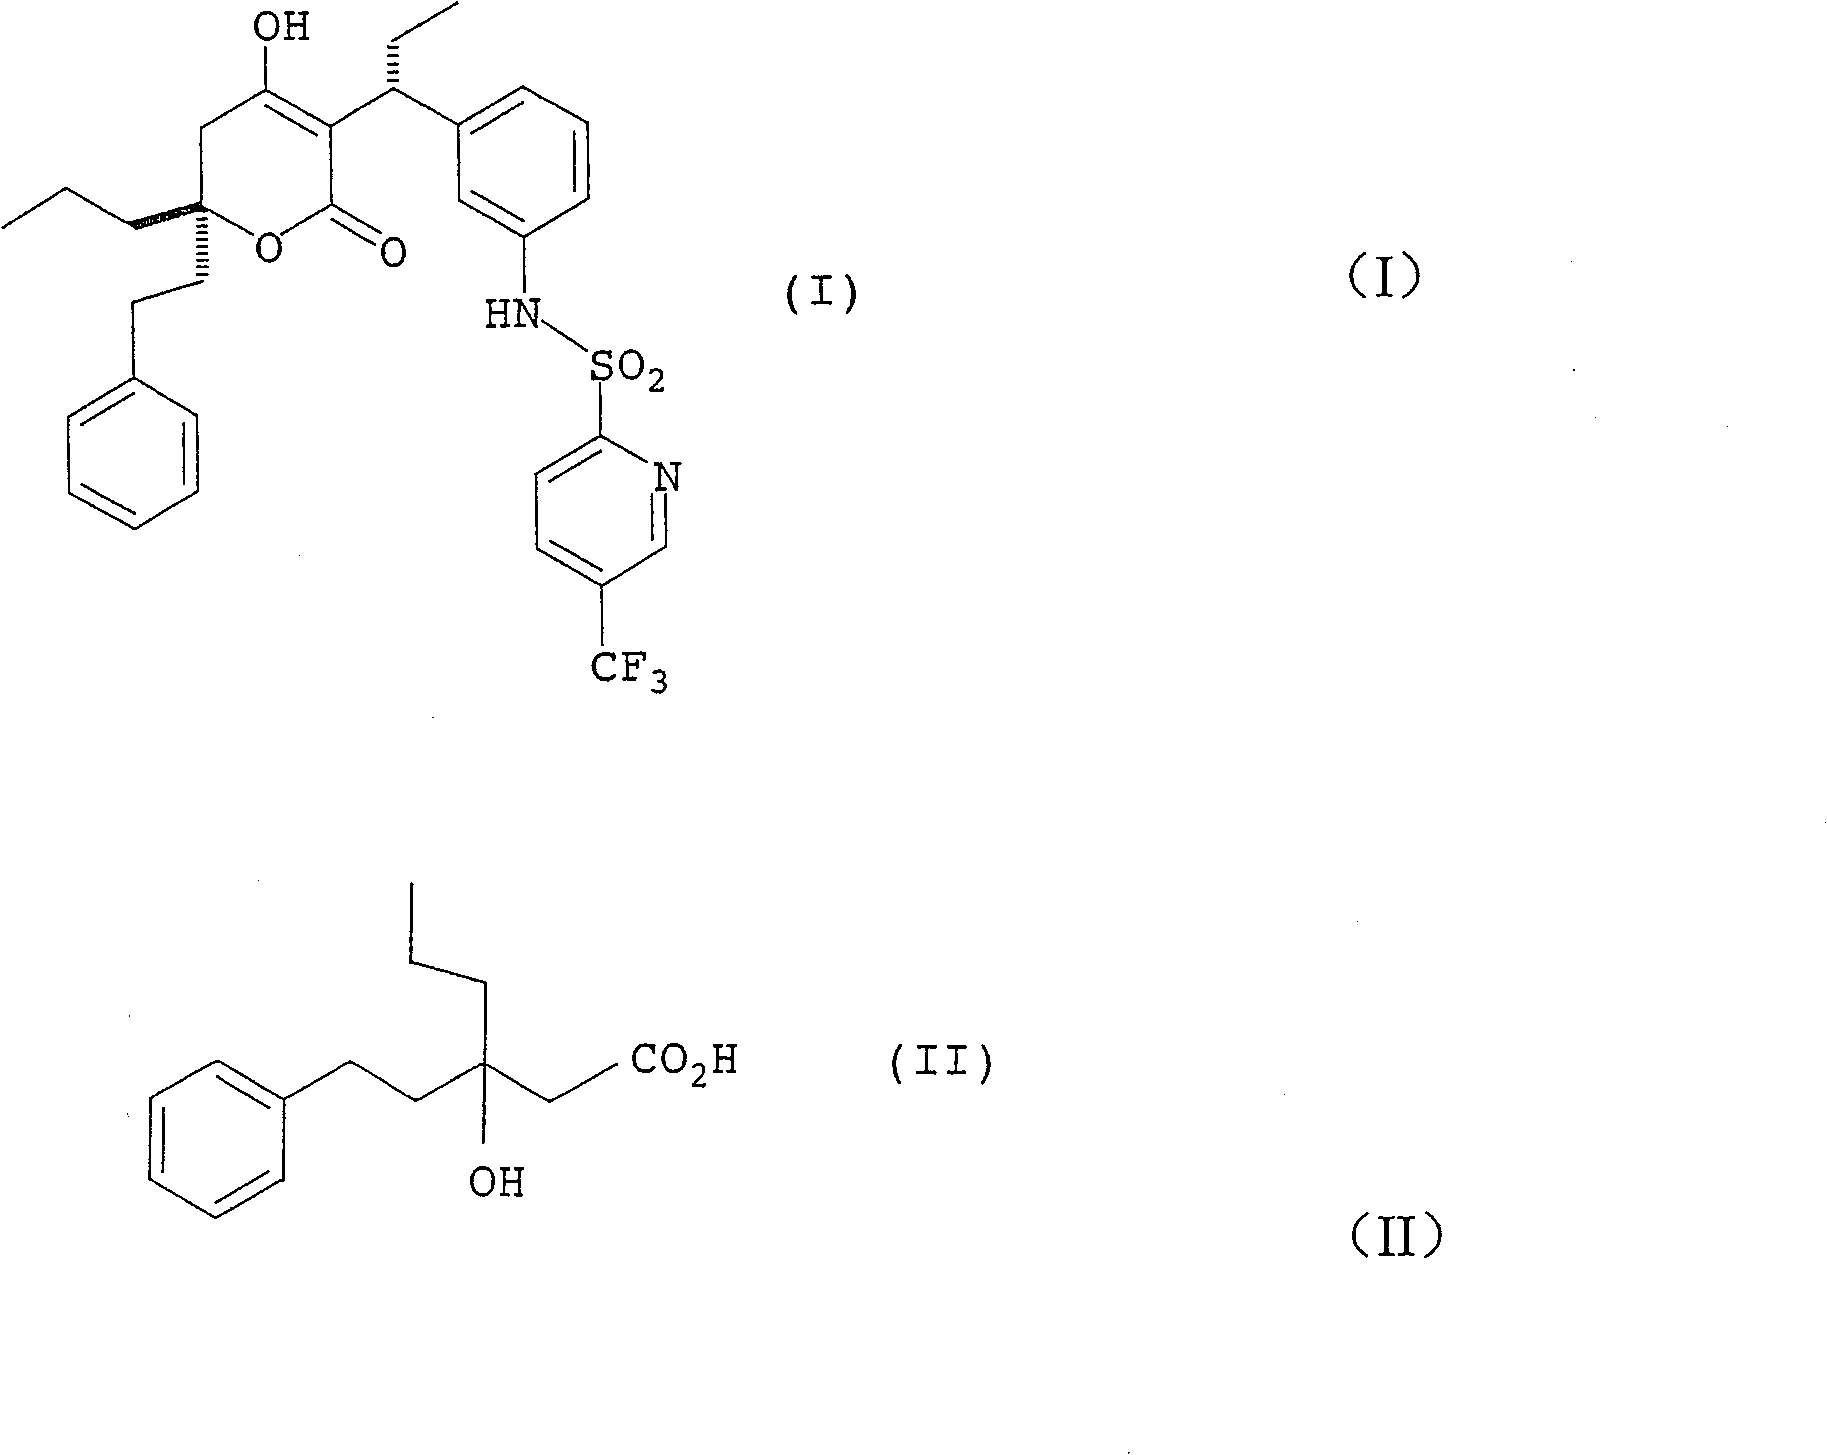 Production method of racemiation3-hydroxy-3- (2-phenylethyl) hexanoic acid C1-6 alkyl ester